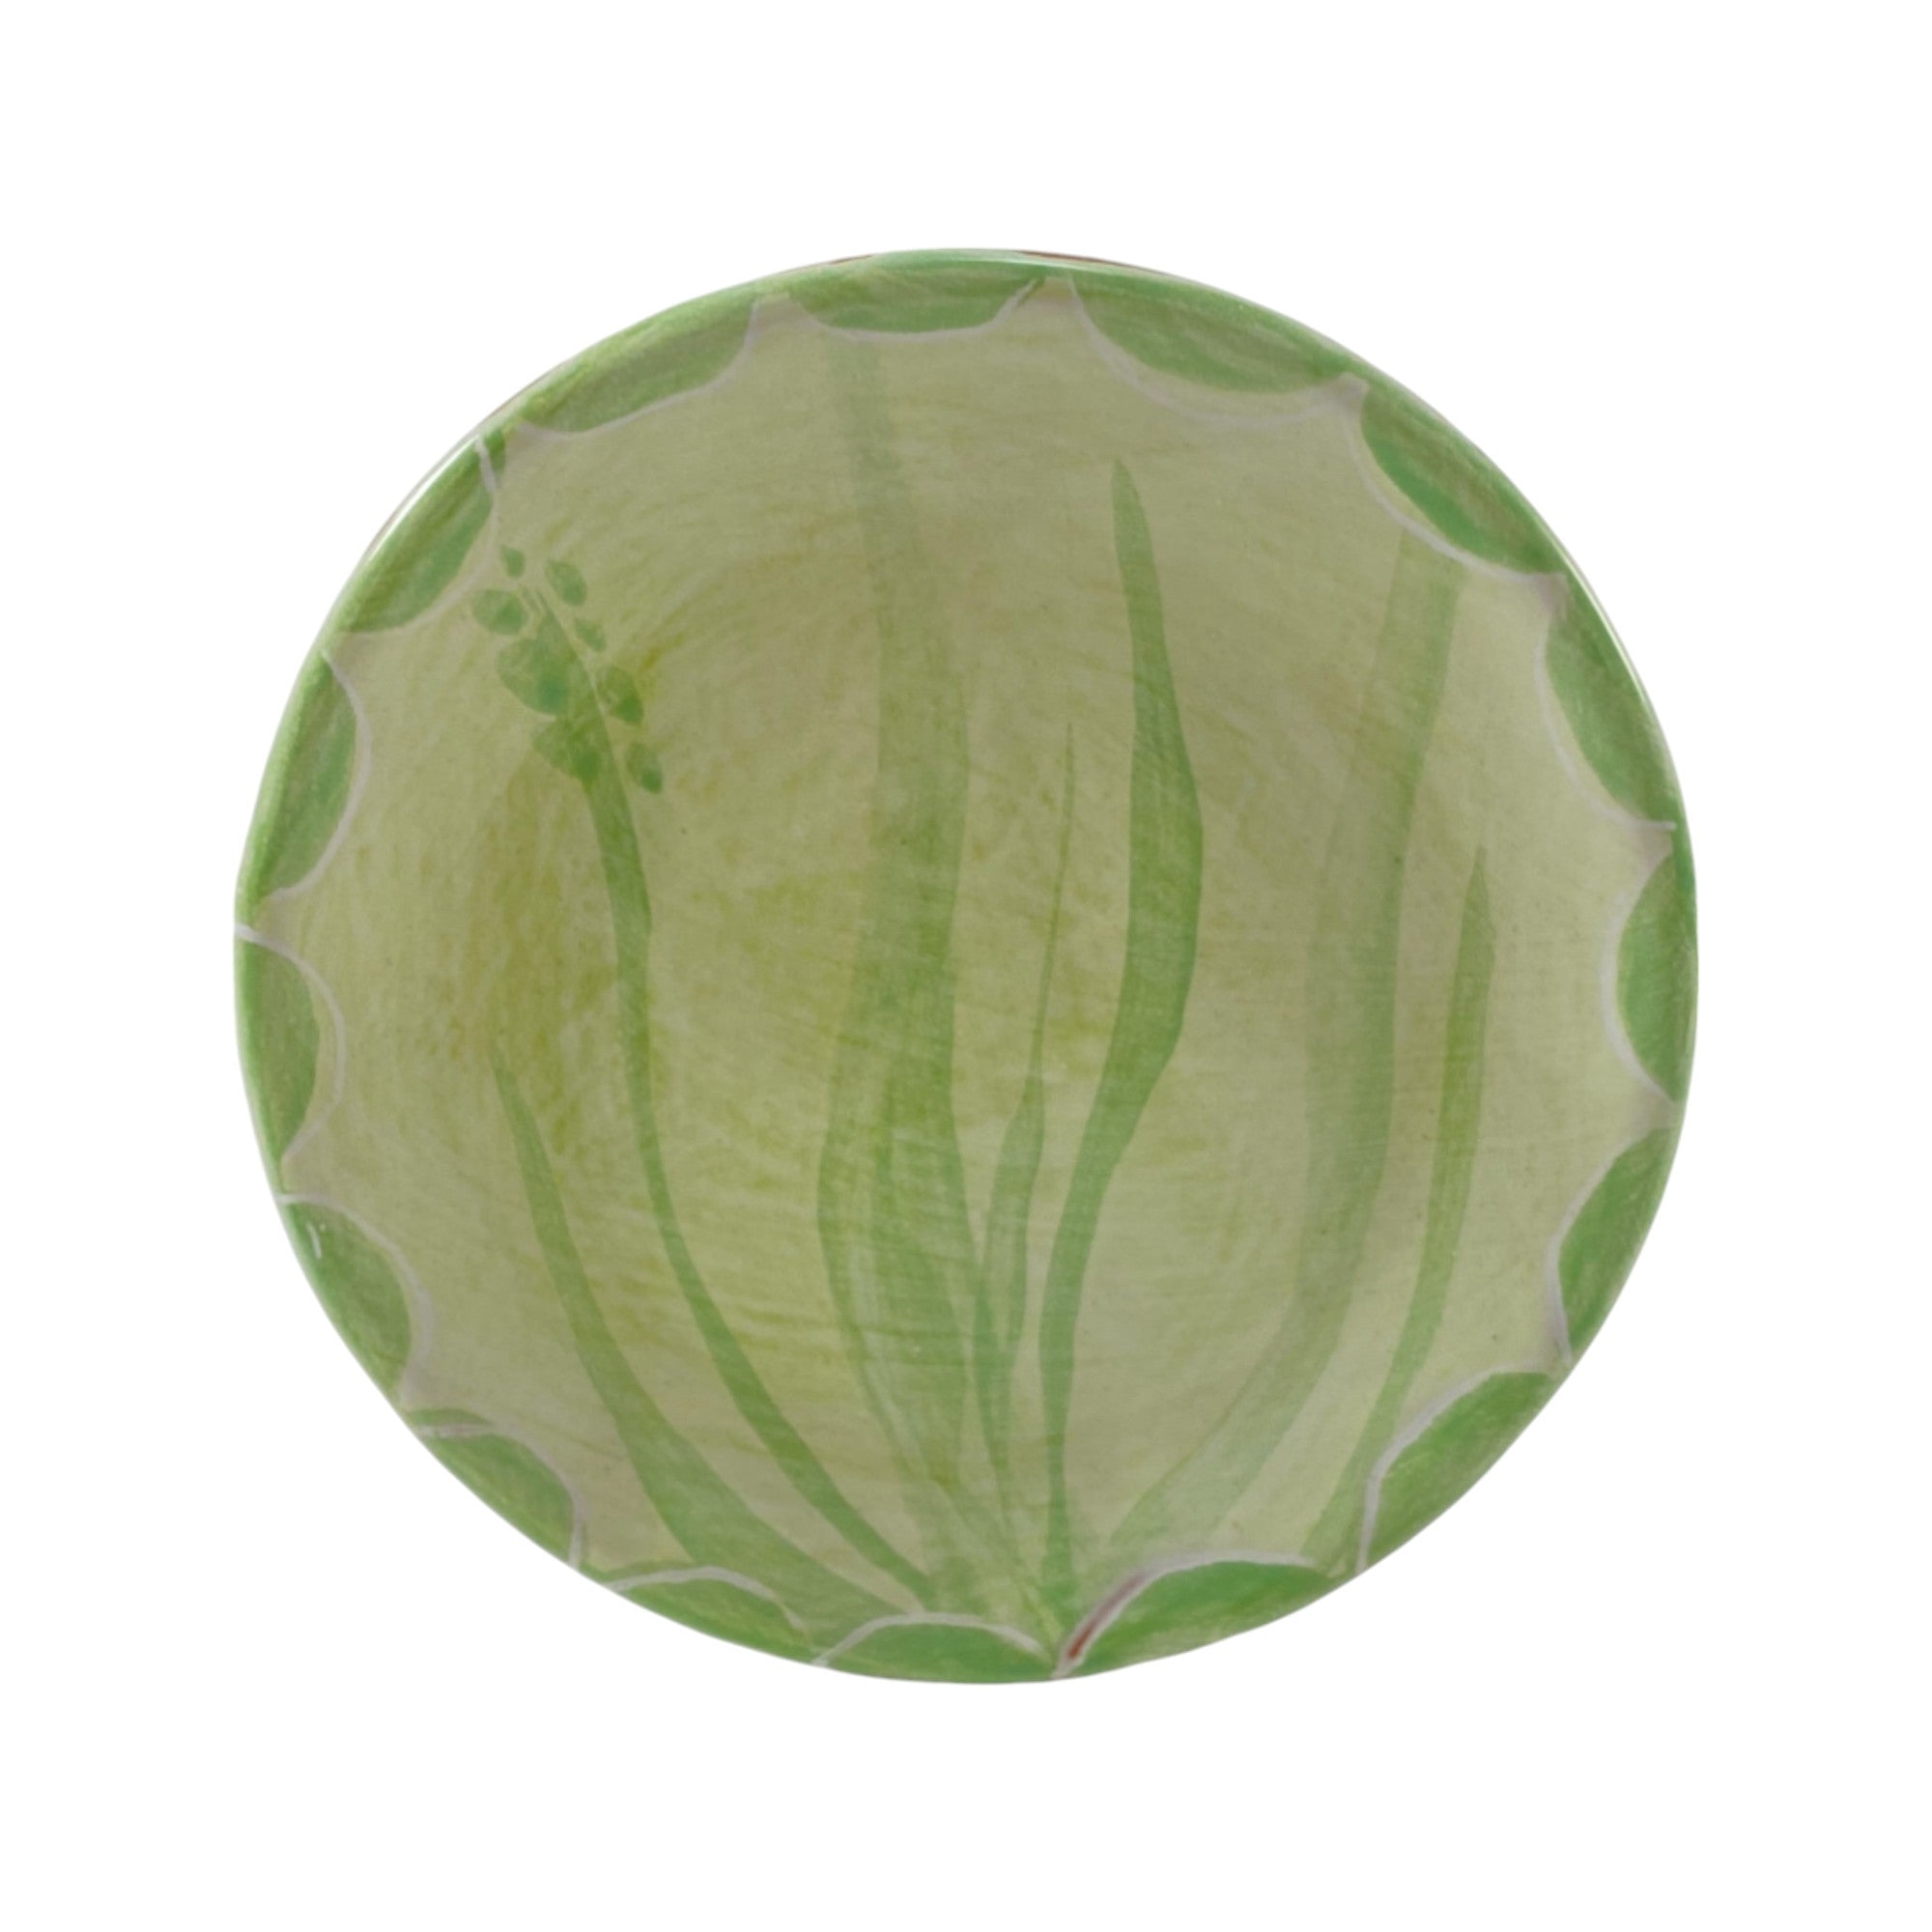 Ring Dish | Looking Glass I